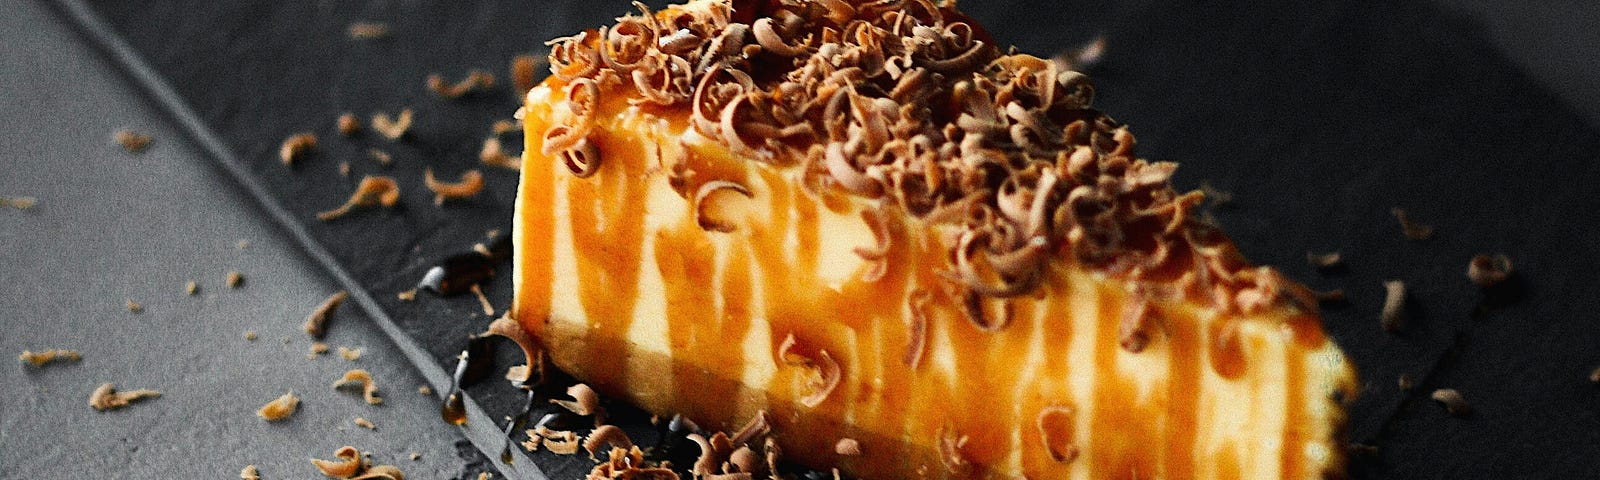 Cheesecake drizzled with caramel and chocolate shavings